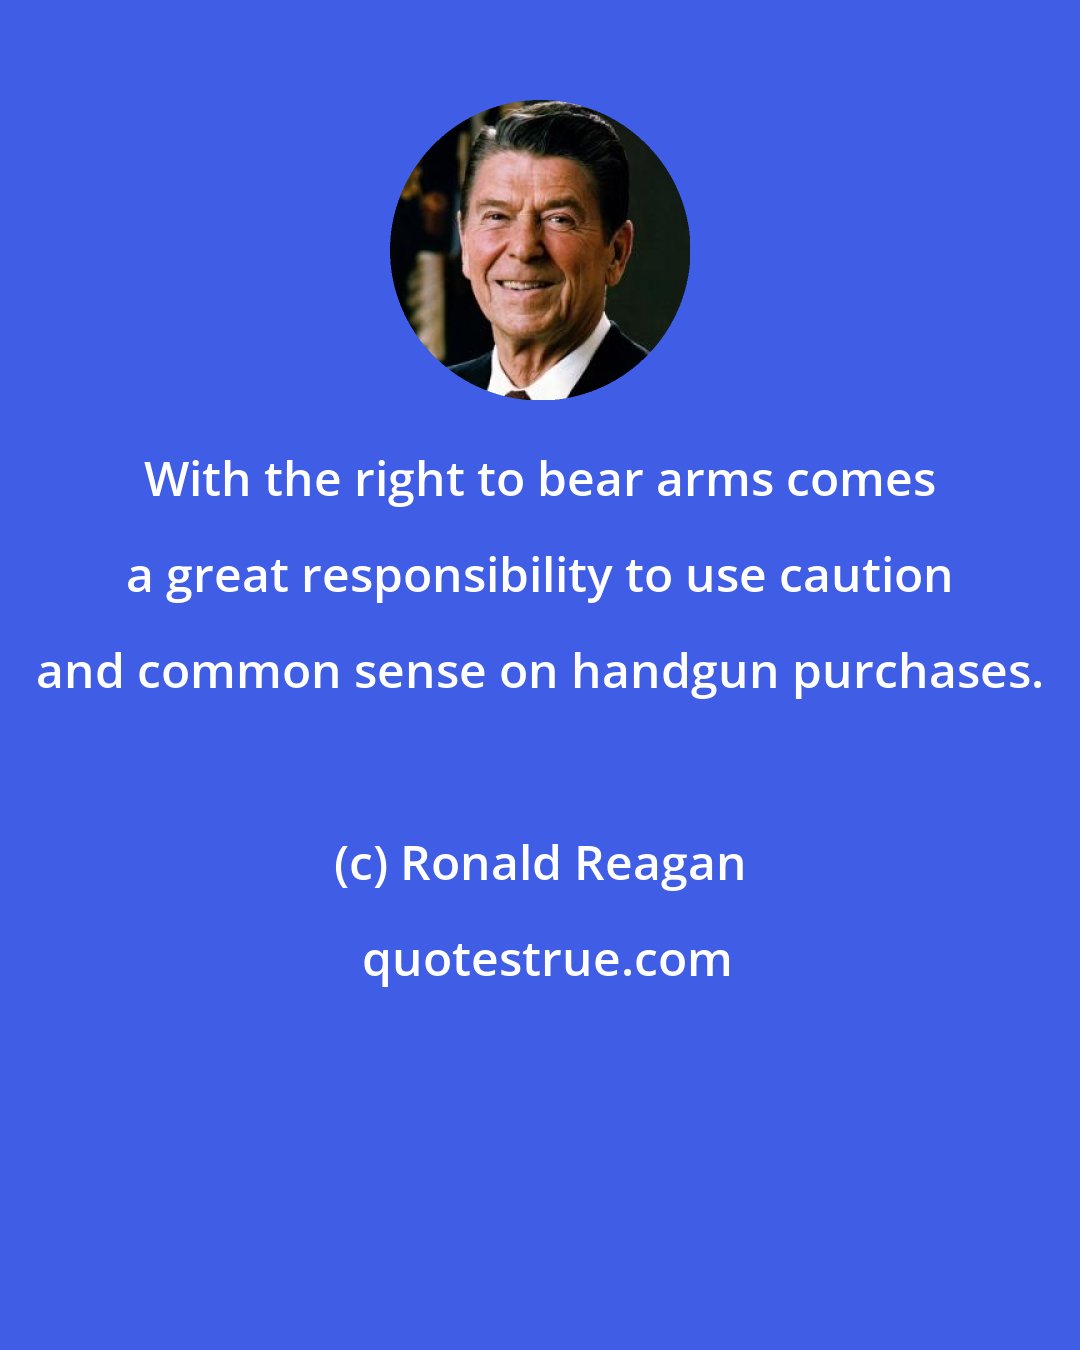 Ronald Reagan: With the right to bear arms comes a great responsibility to use caution and common sense on handgun purchases.